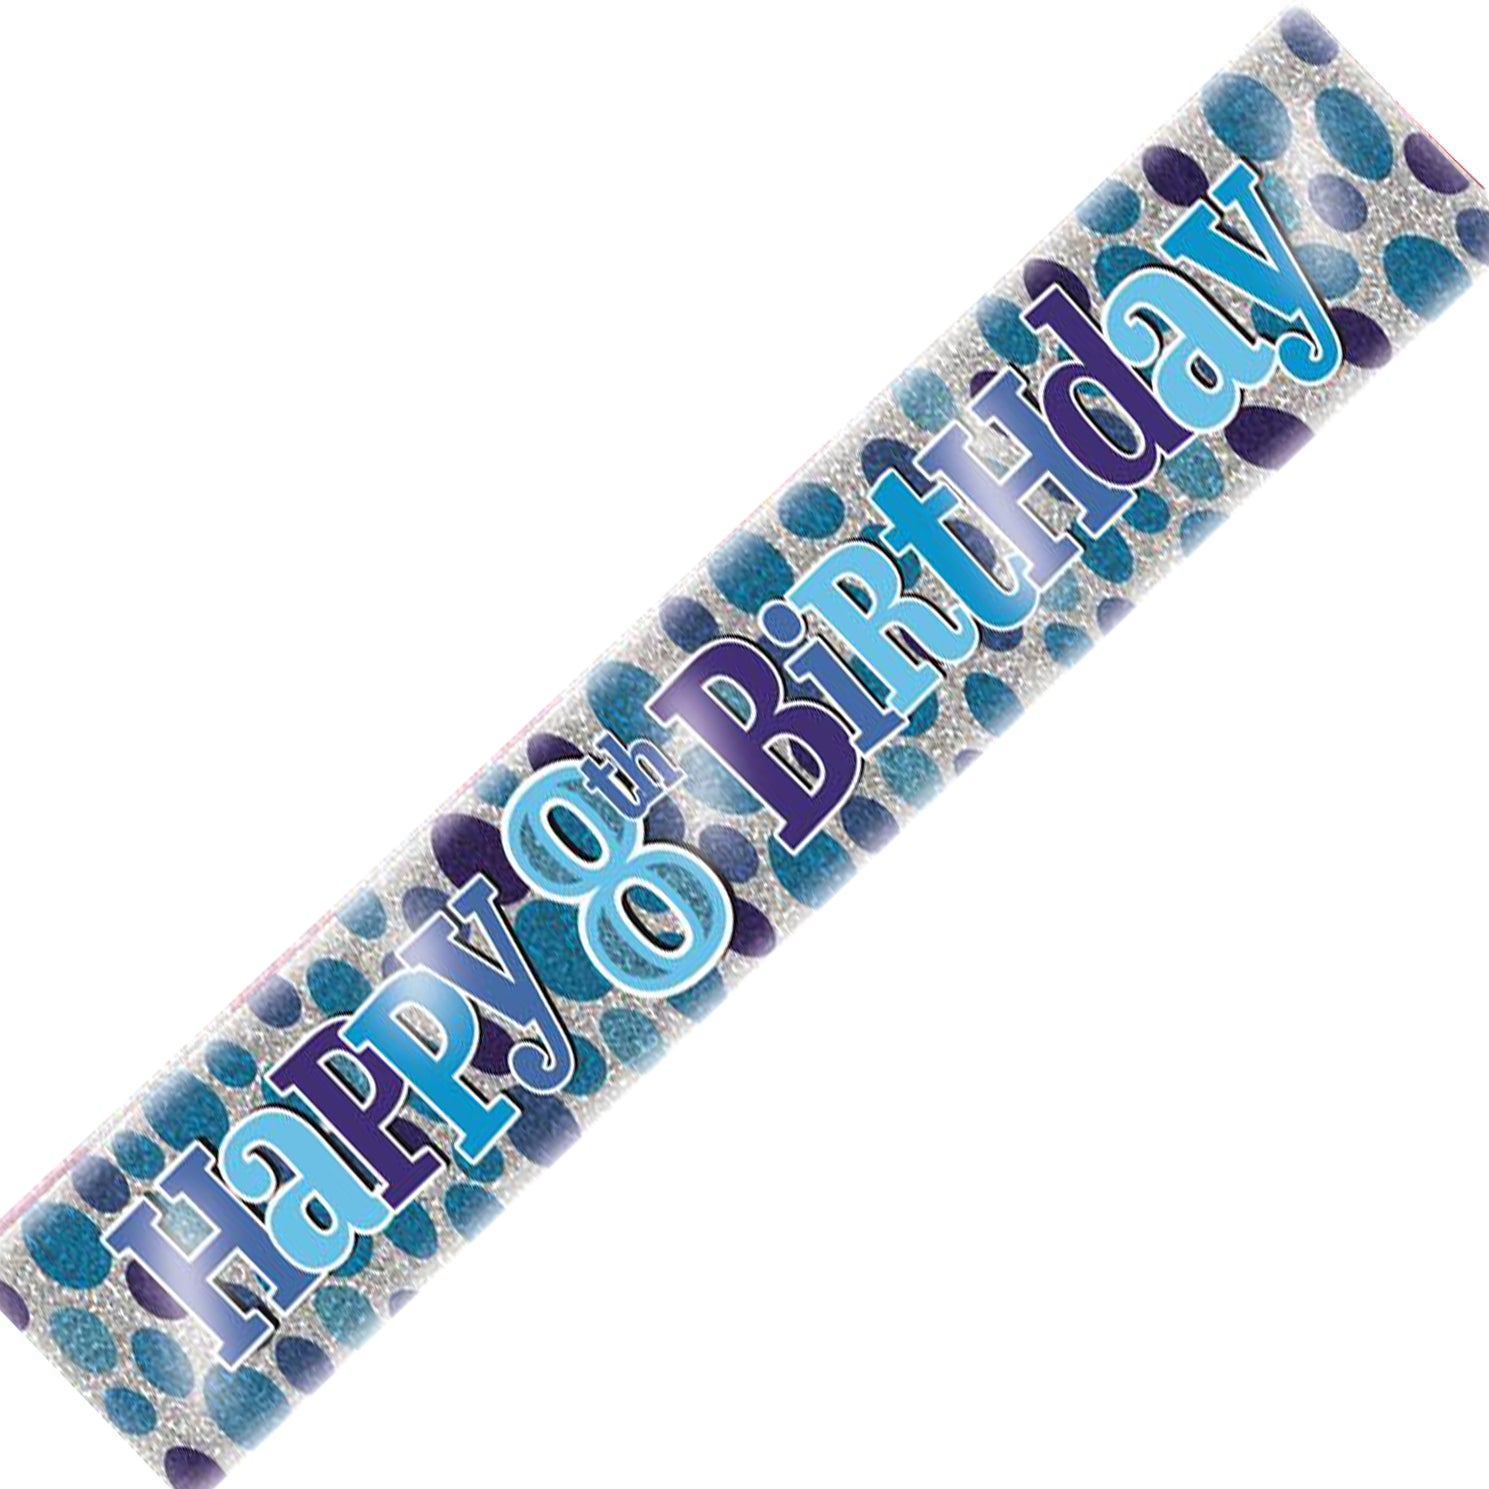 Age 8 Birthday Banner Blue And silver Holographic Recyclable 8th Birthday Party Banner